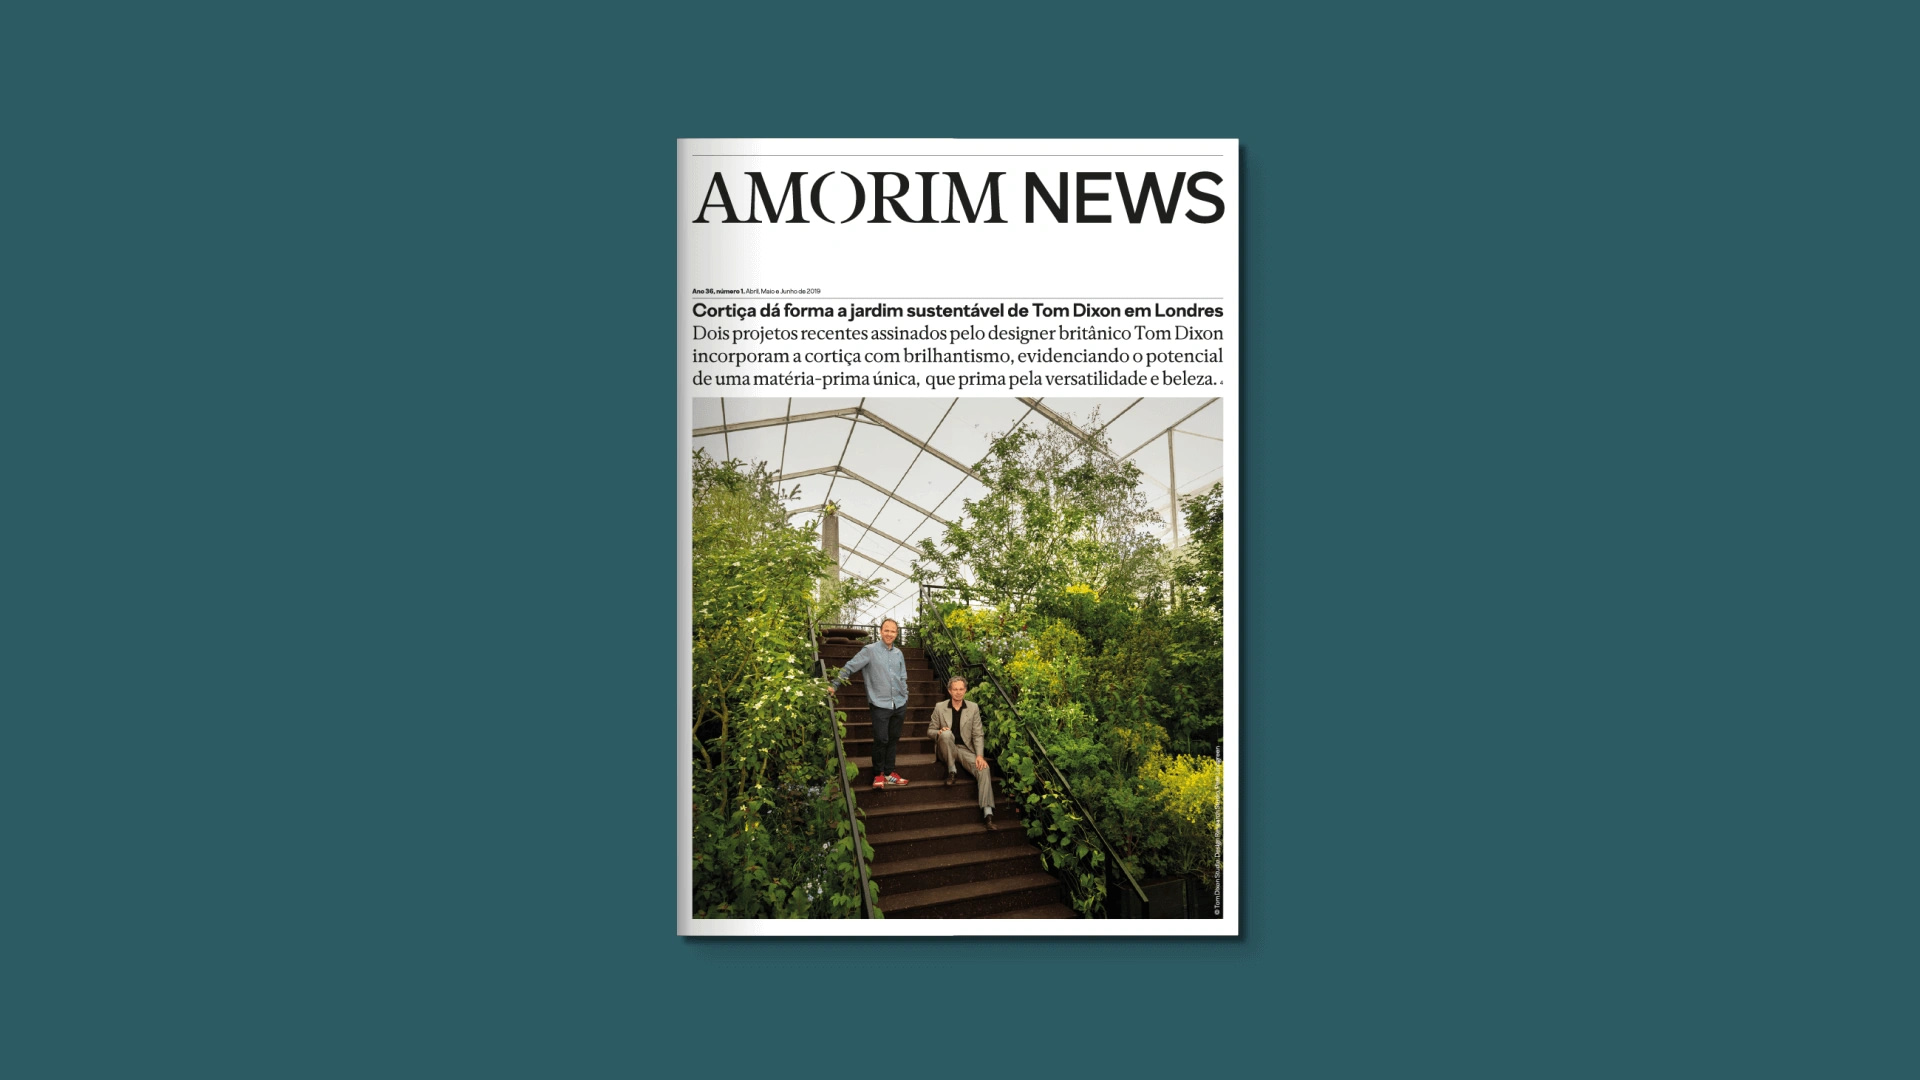 Image taken from the Amorim motion film, a mockup of a maganize cover called "Amorim News".